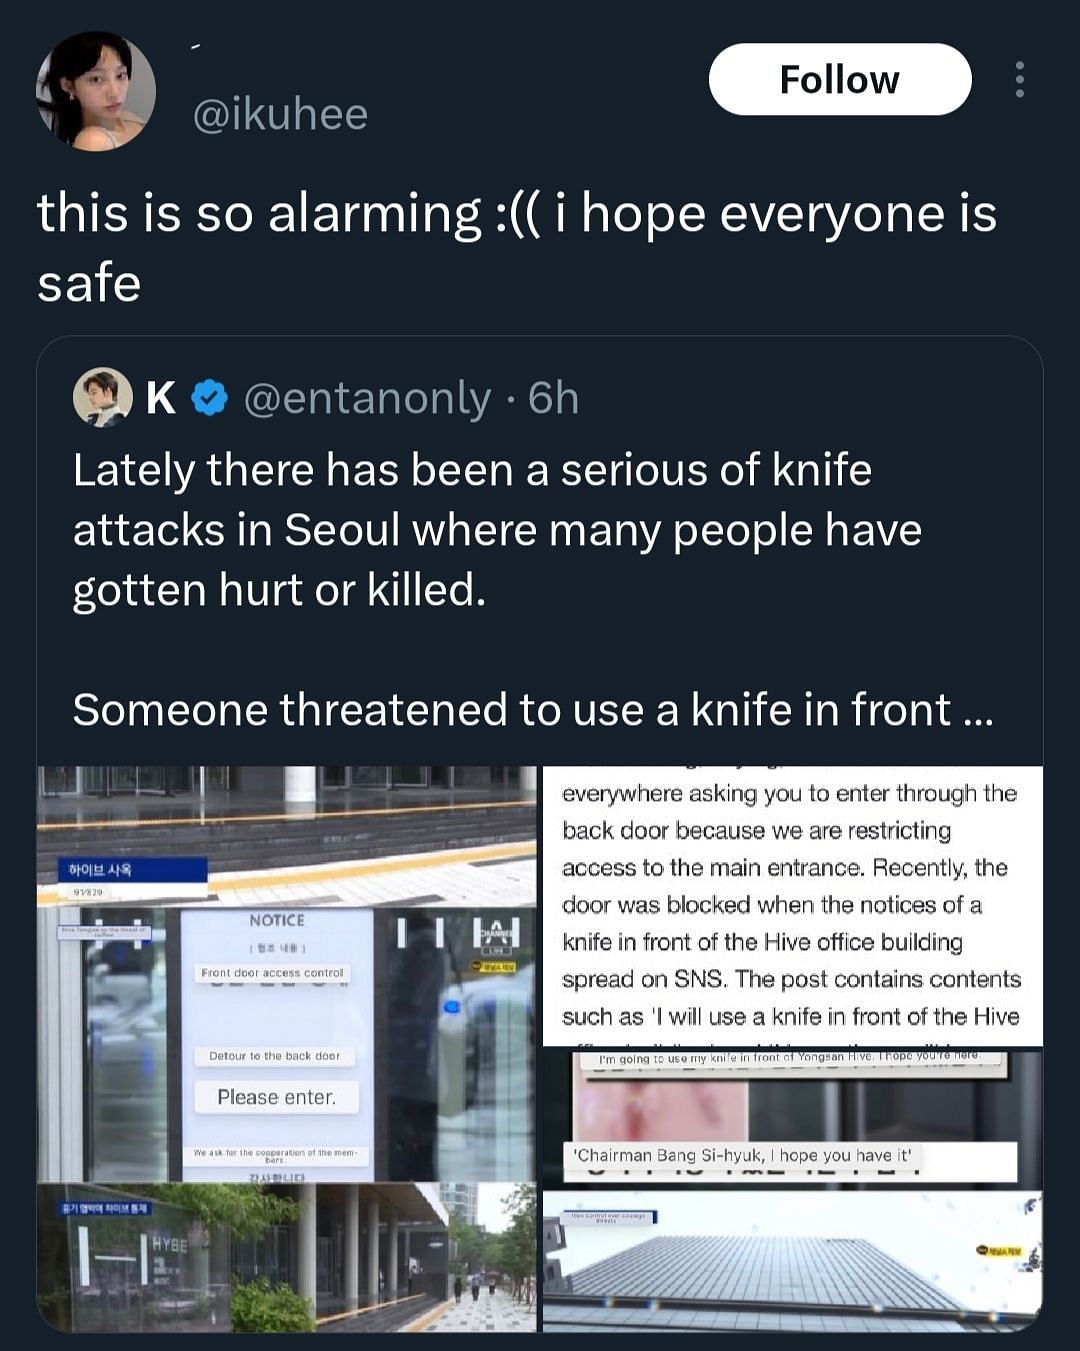 Fans reacting to the knife threat at HYBE (Image via ikuhee)